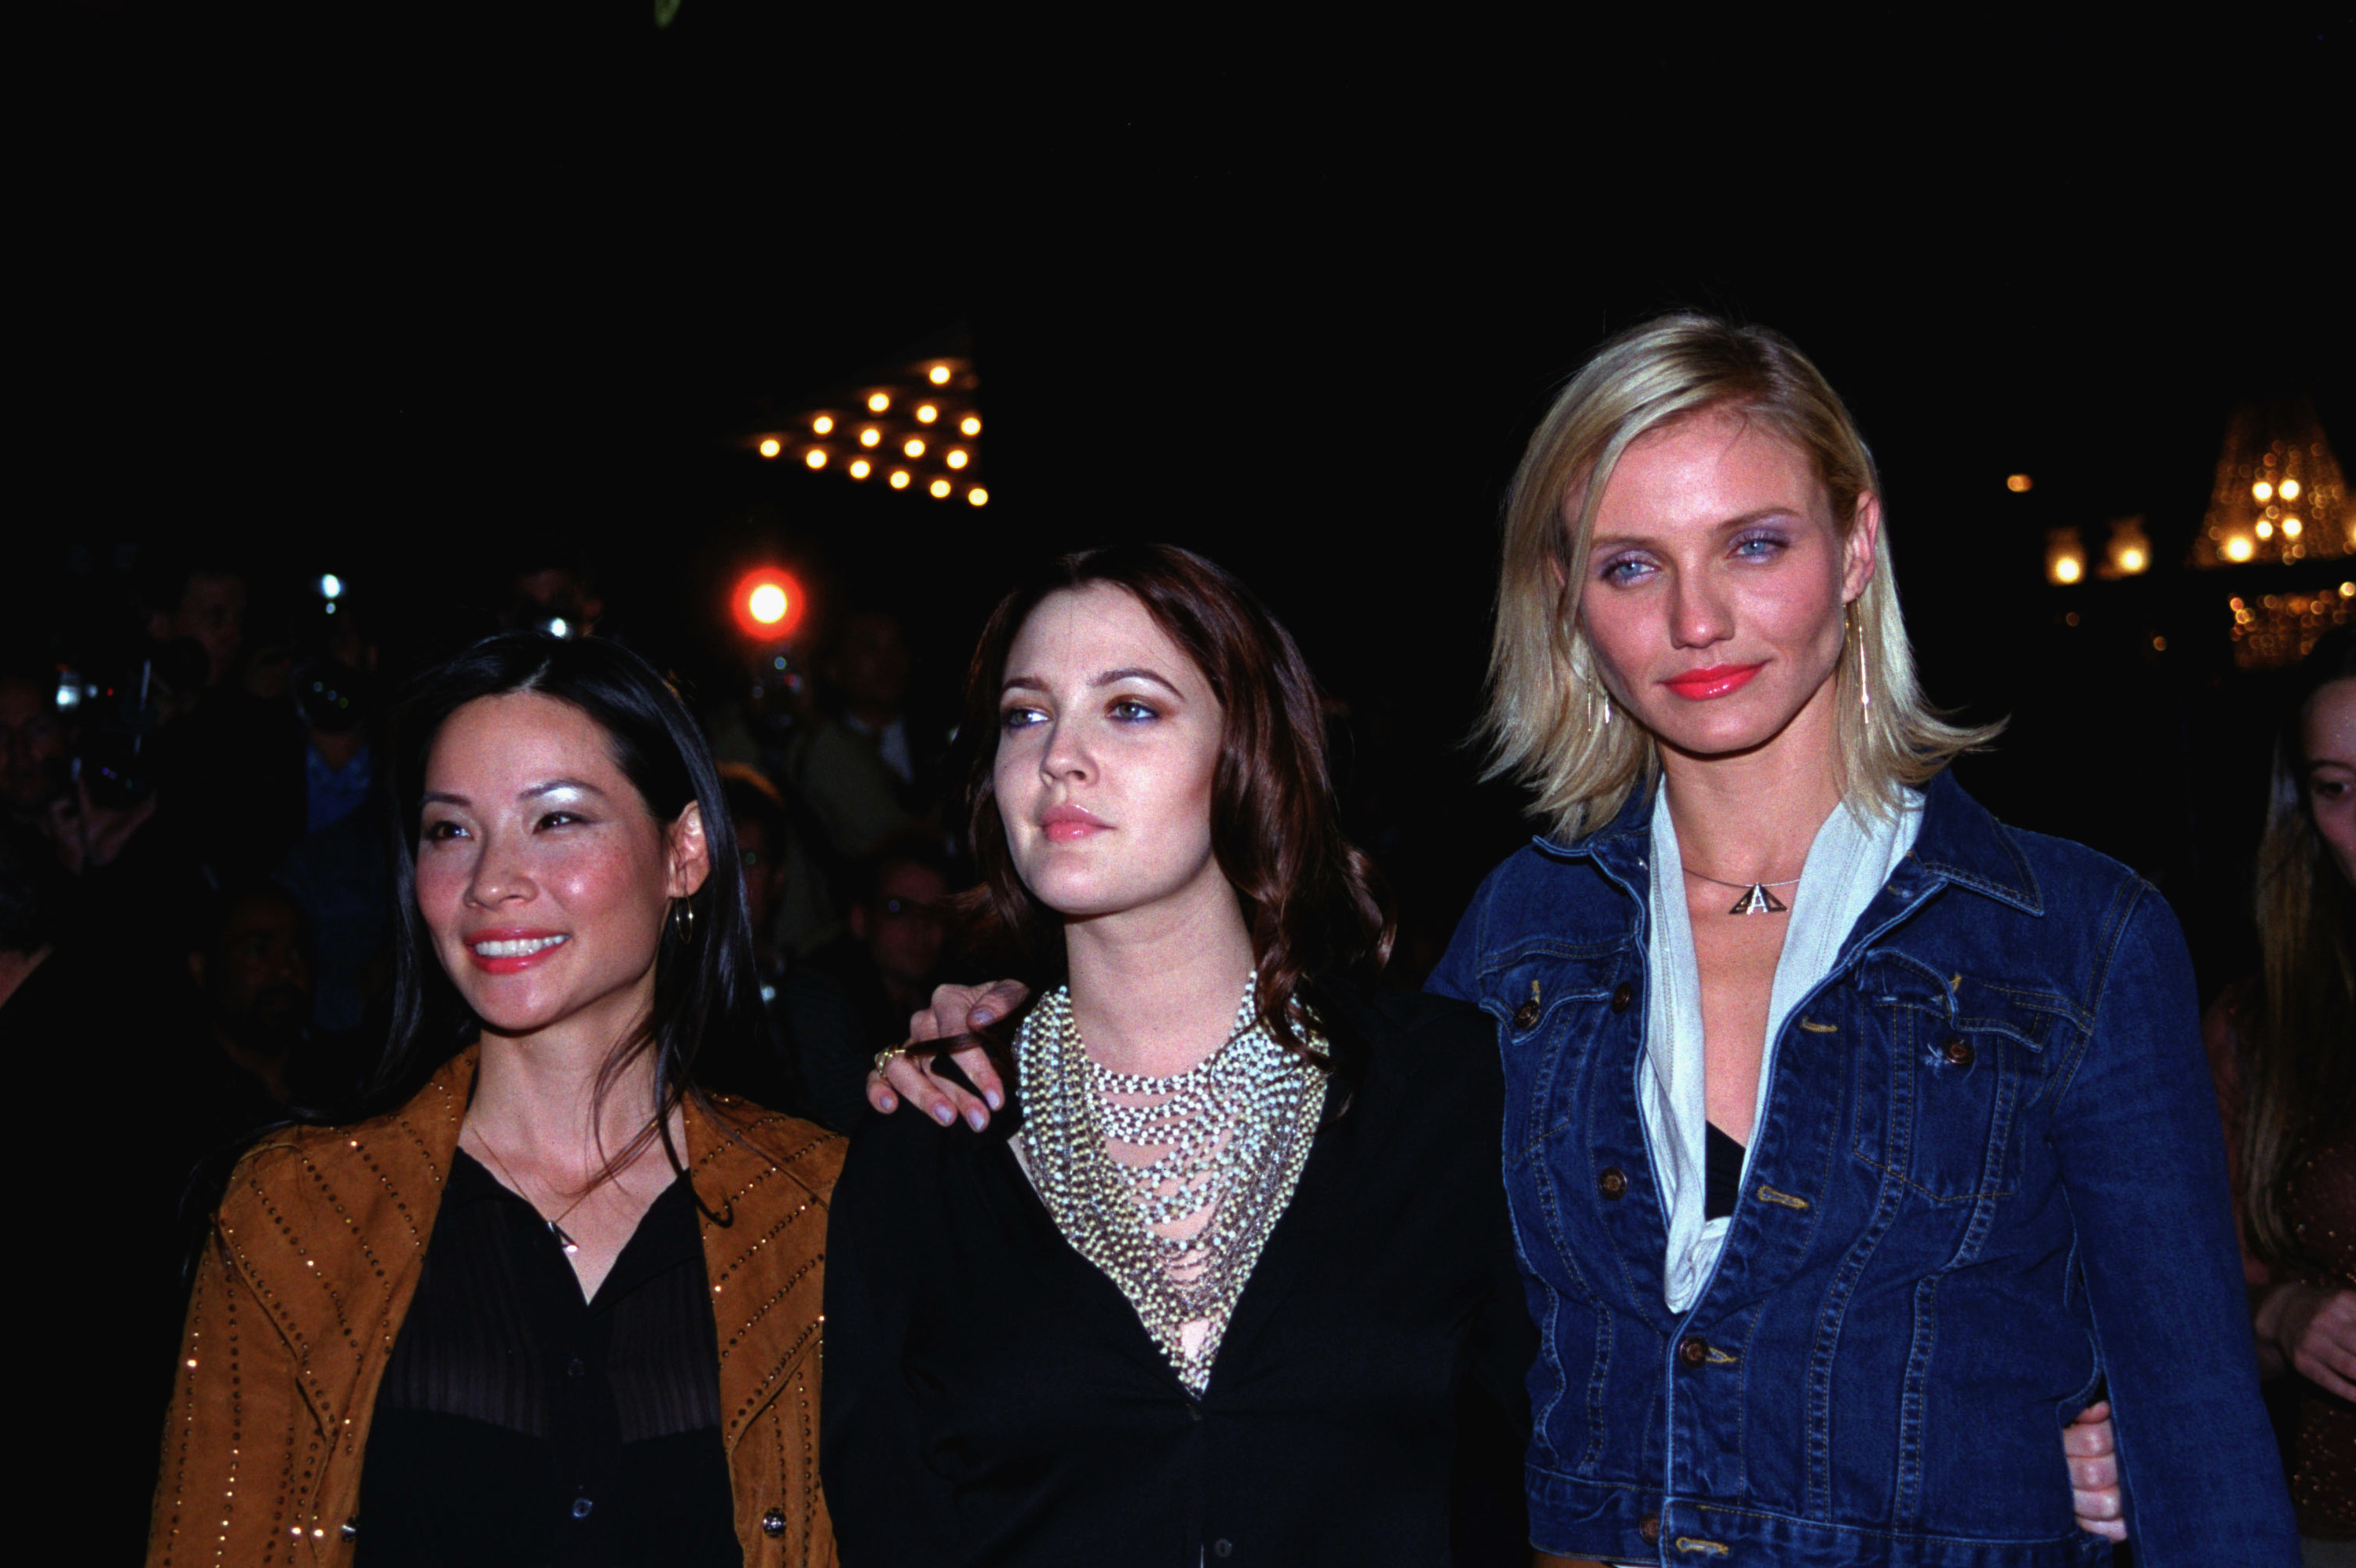 Lucy Liu, Drew Barrymore, and Cameron Diaz are pictured at an event in 2000